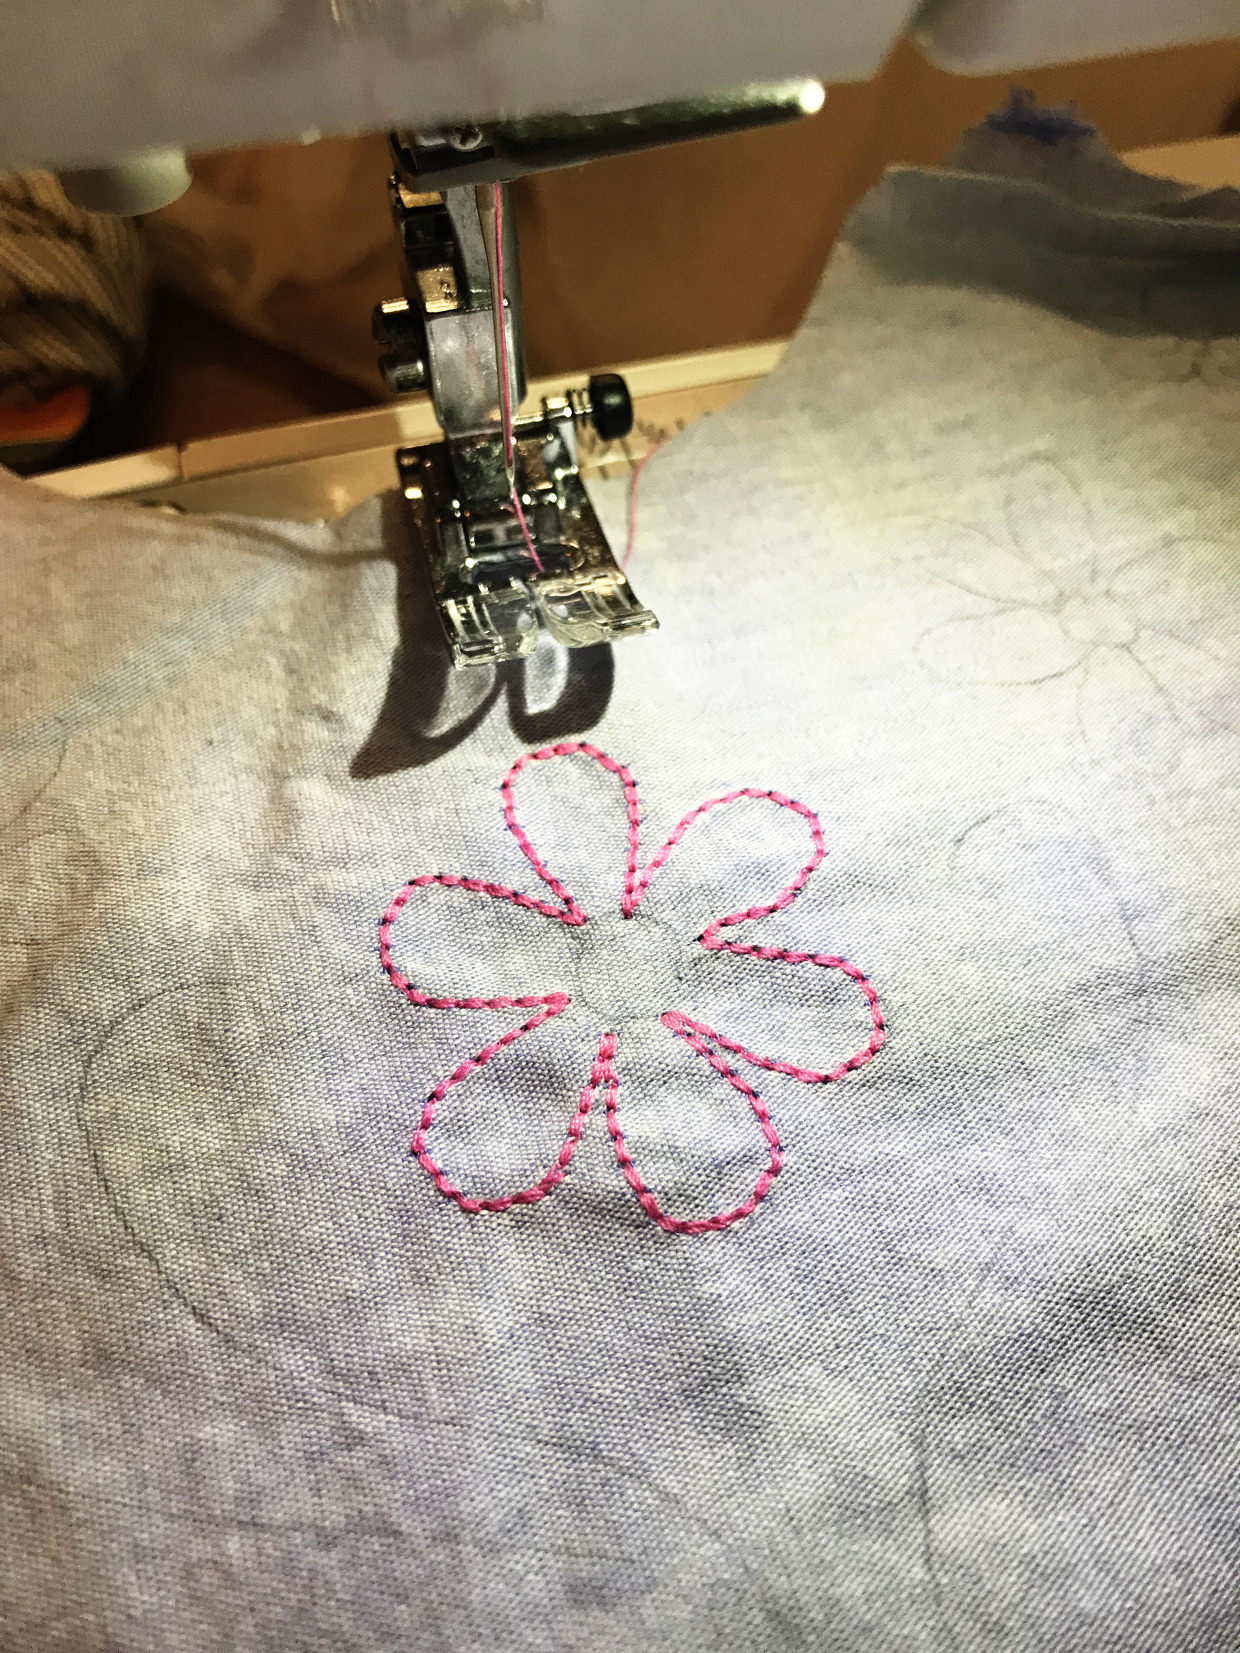 How To Embroider On A Regular Home Sewing Machine